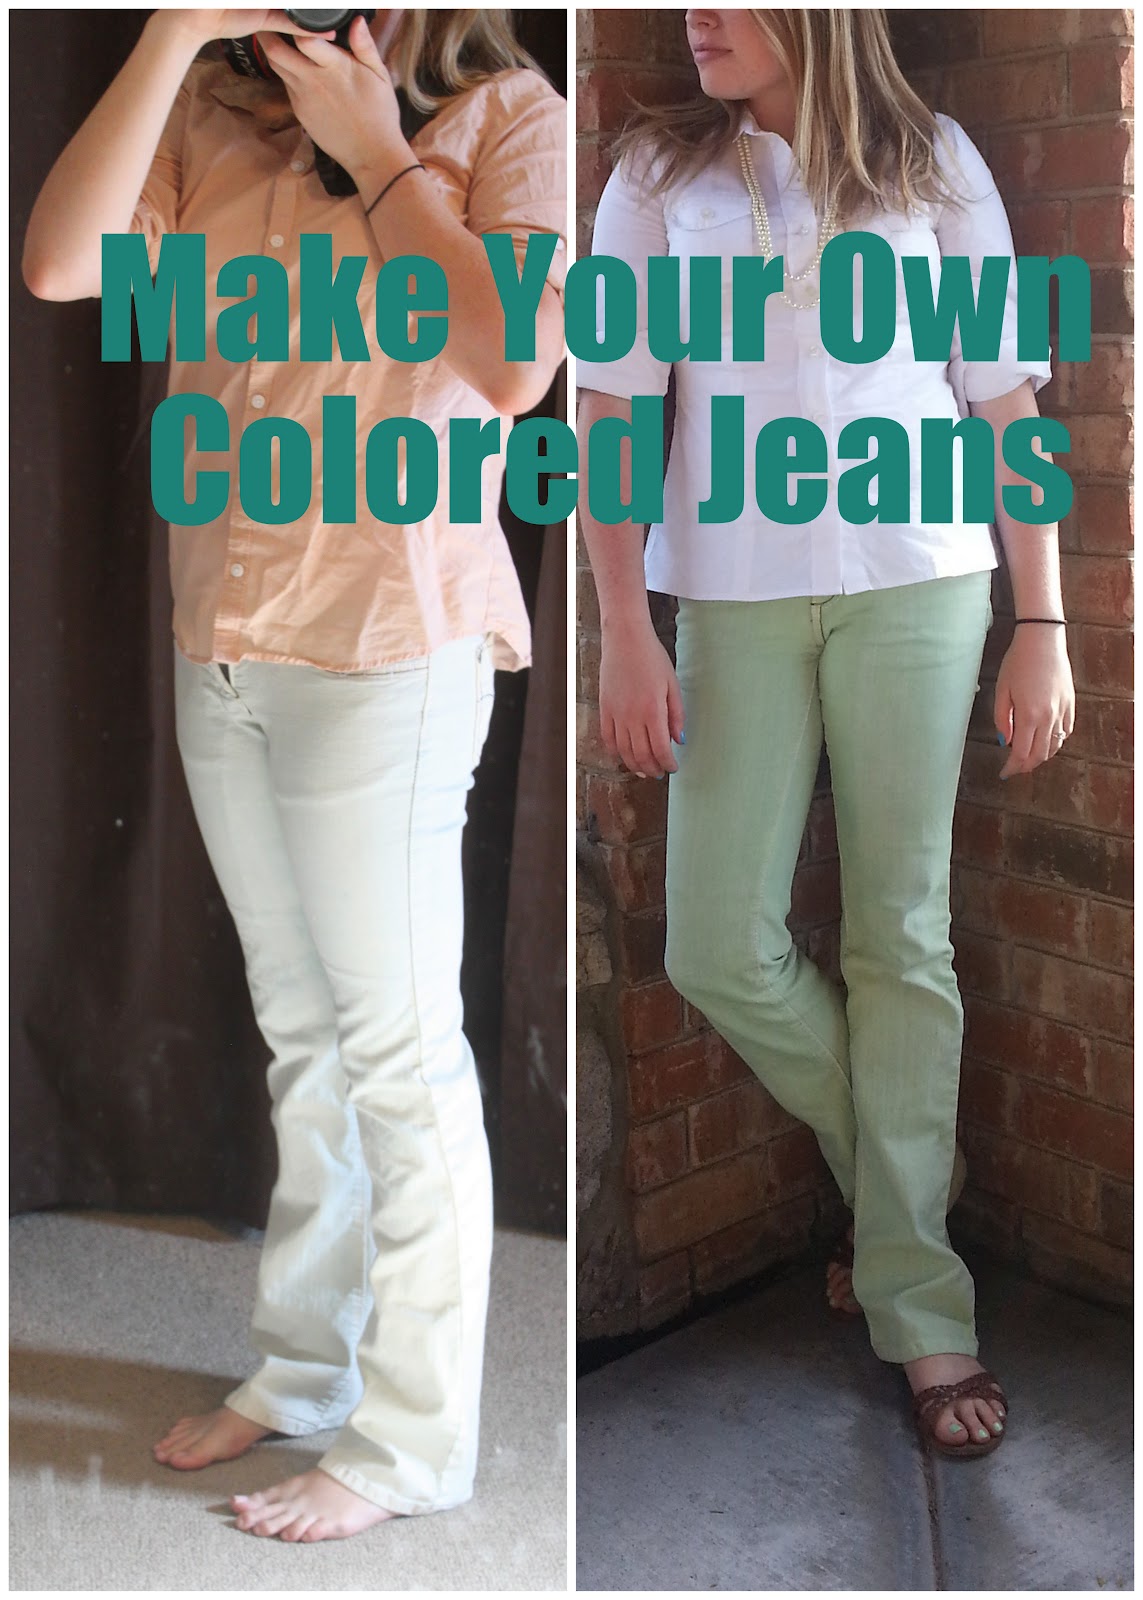 Keeping Up With Us Jones': DIY Colored Jeans